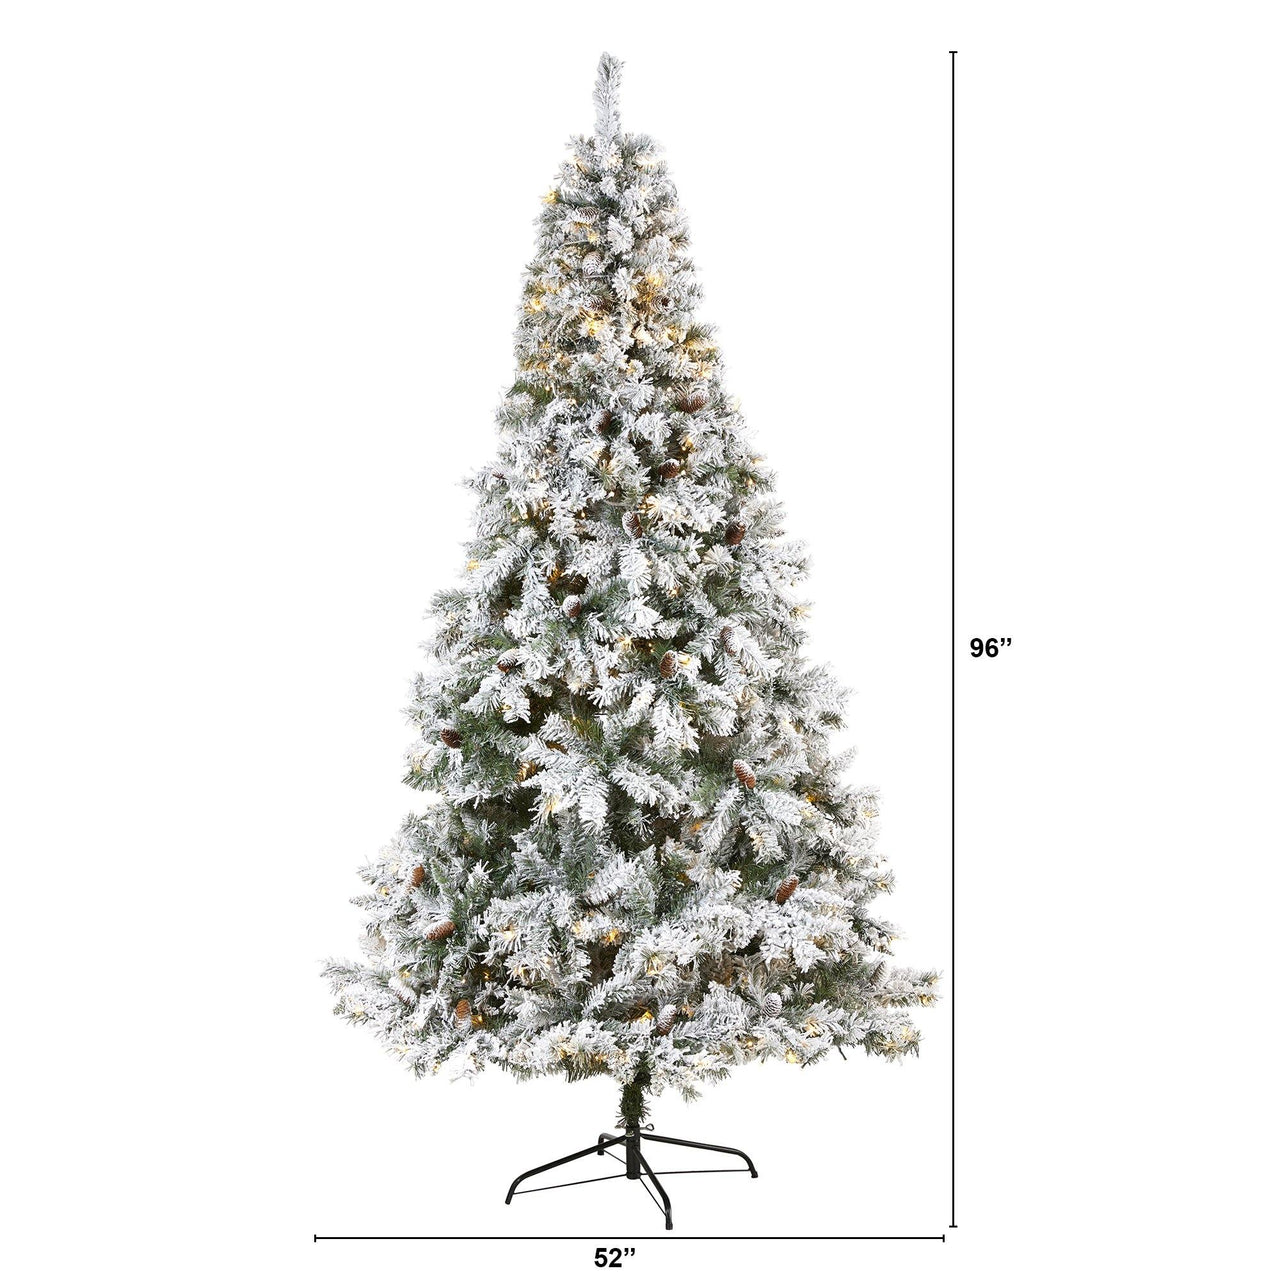 8' Flocked White River Mountain Pine Artificial Christmas Tree with Pinecones and 500 Clear LED Lights - The Fox Decor